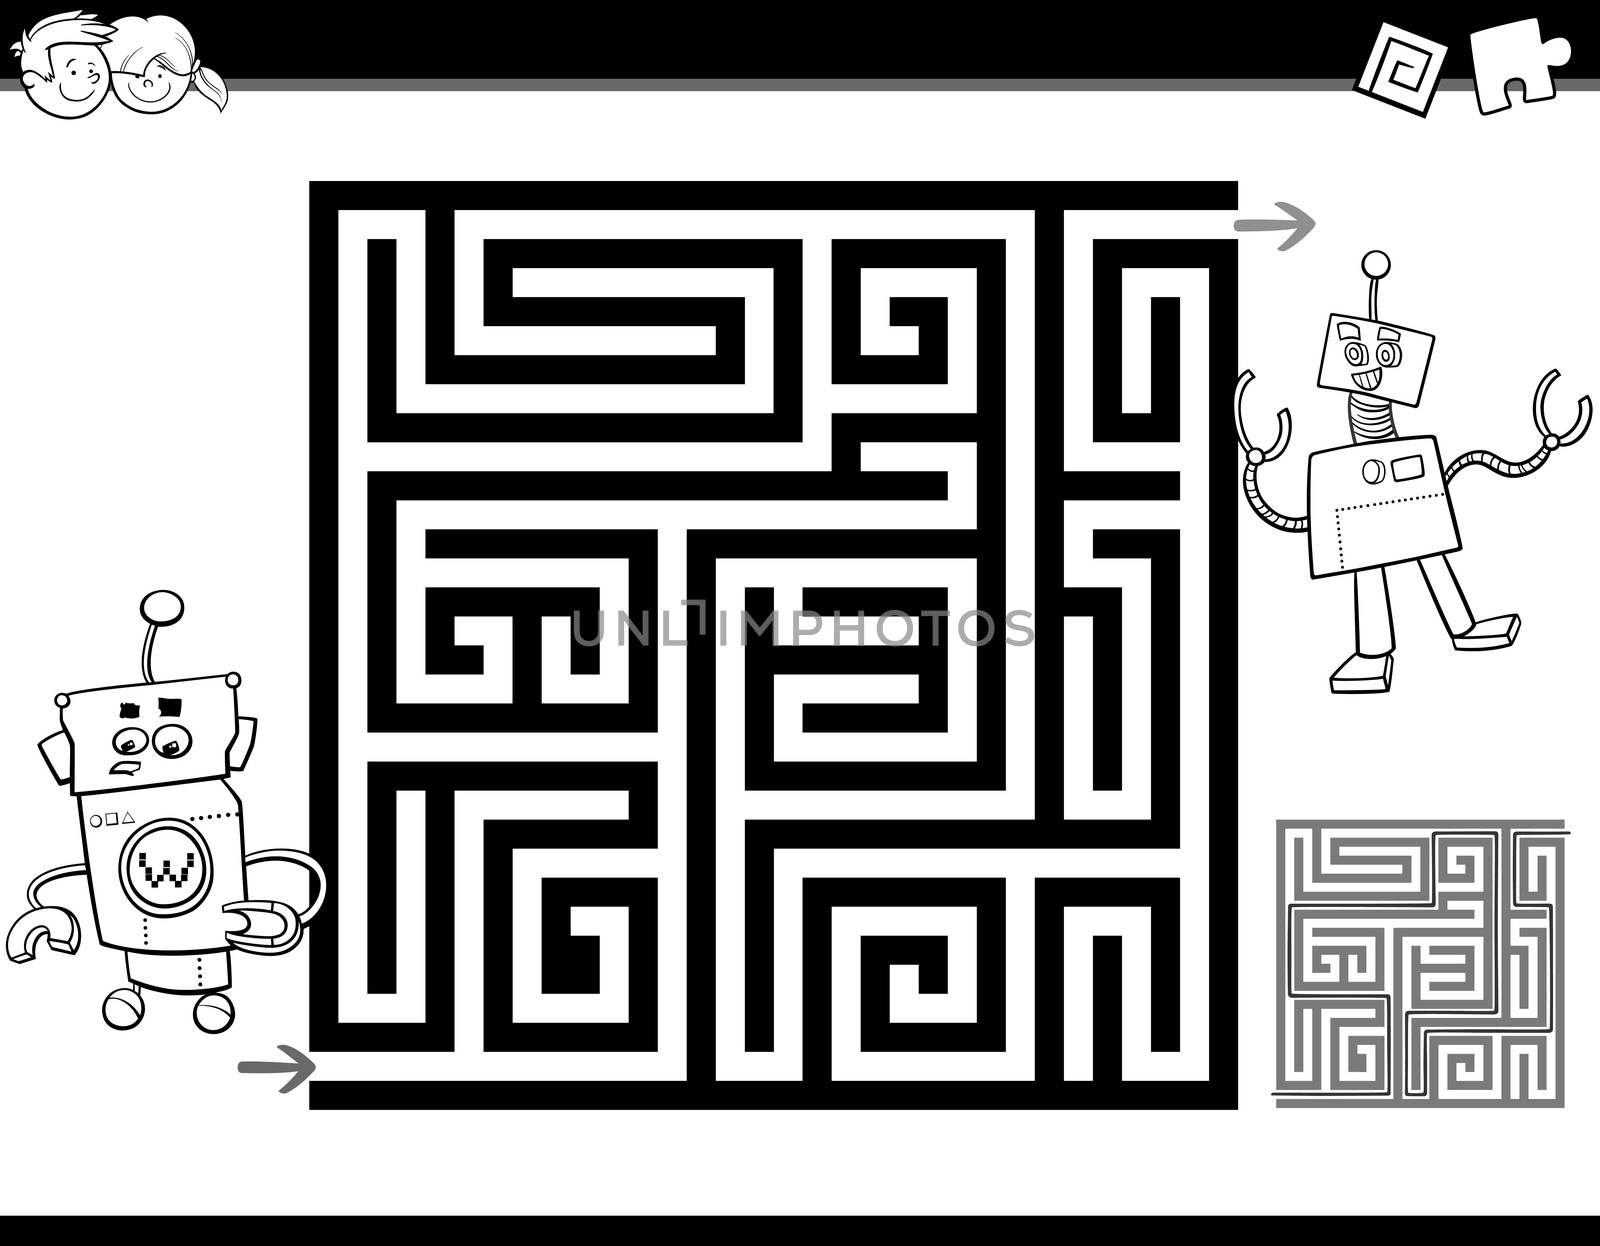 Black and White Cartoon Illustration of Education Maze or Labyrinth Activity Task for Children with Funny Robots for Coloring